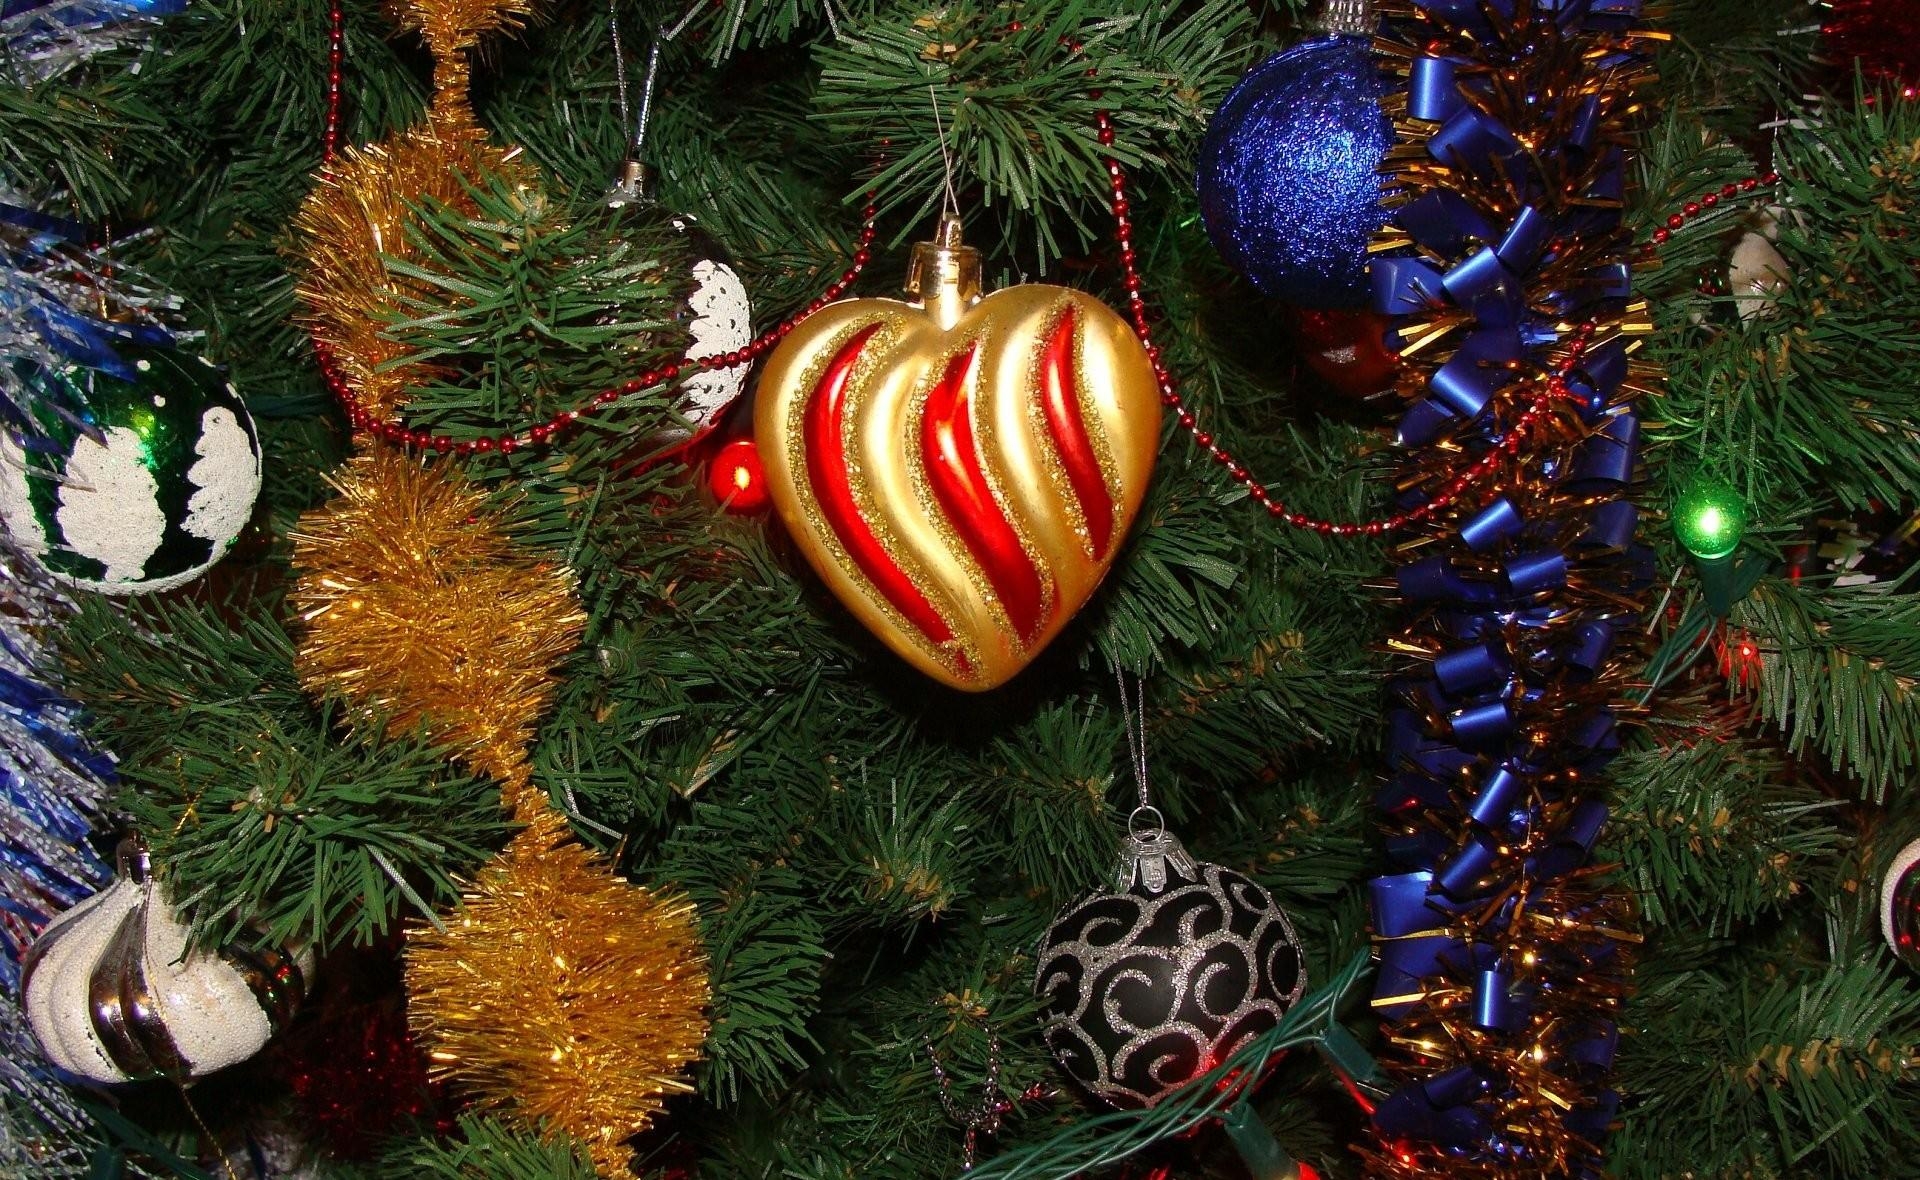 A heart-shaped toy on the Christmas tree